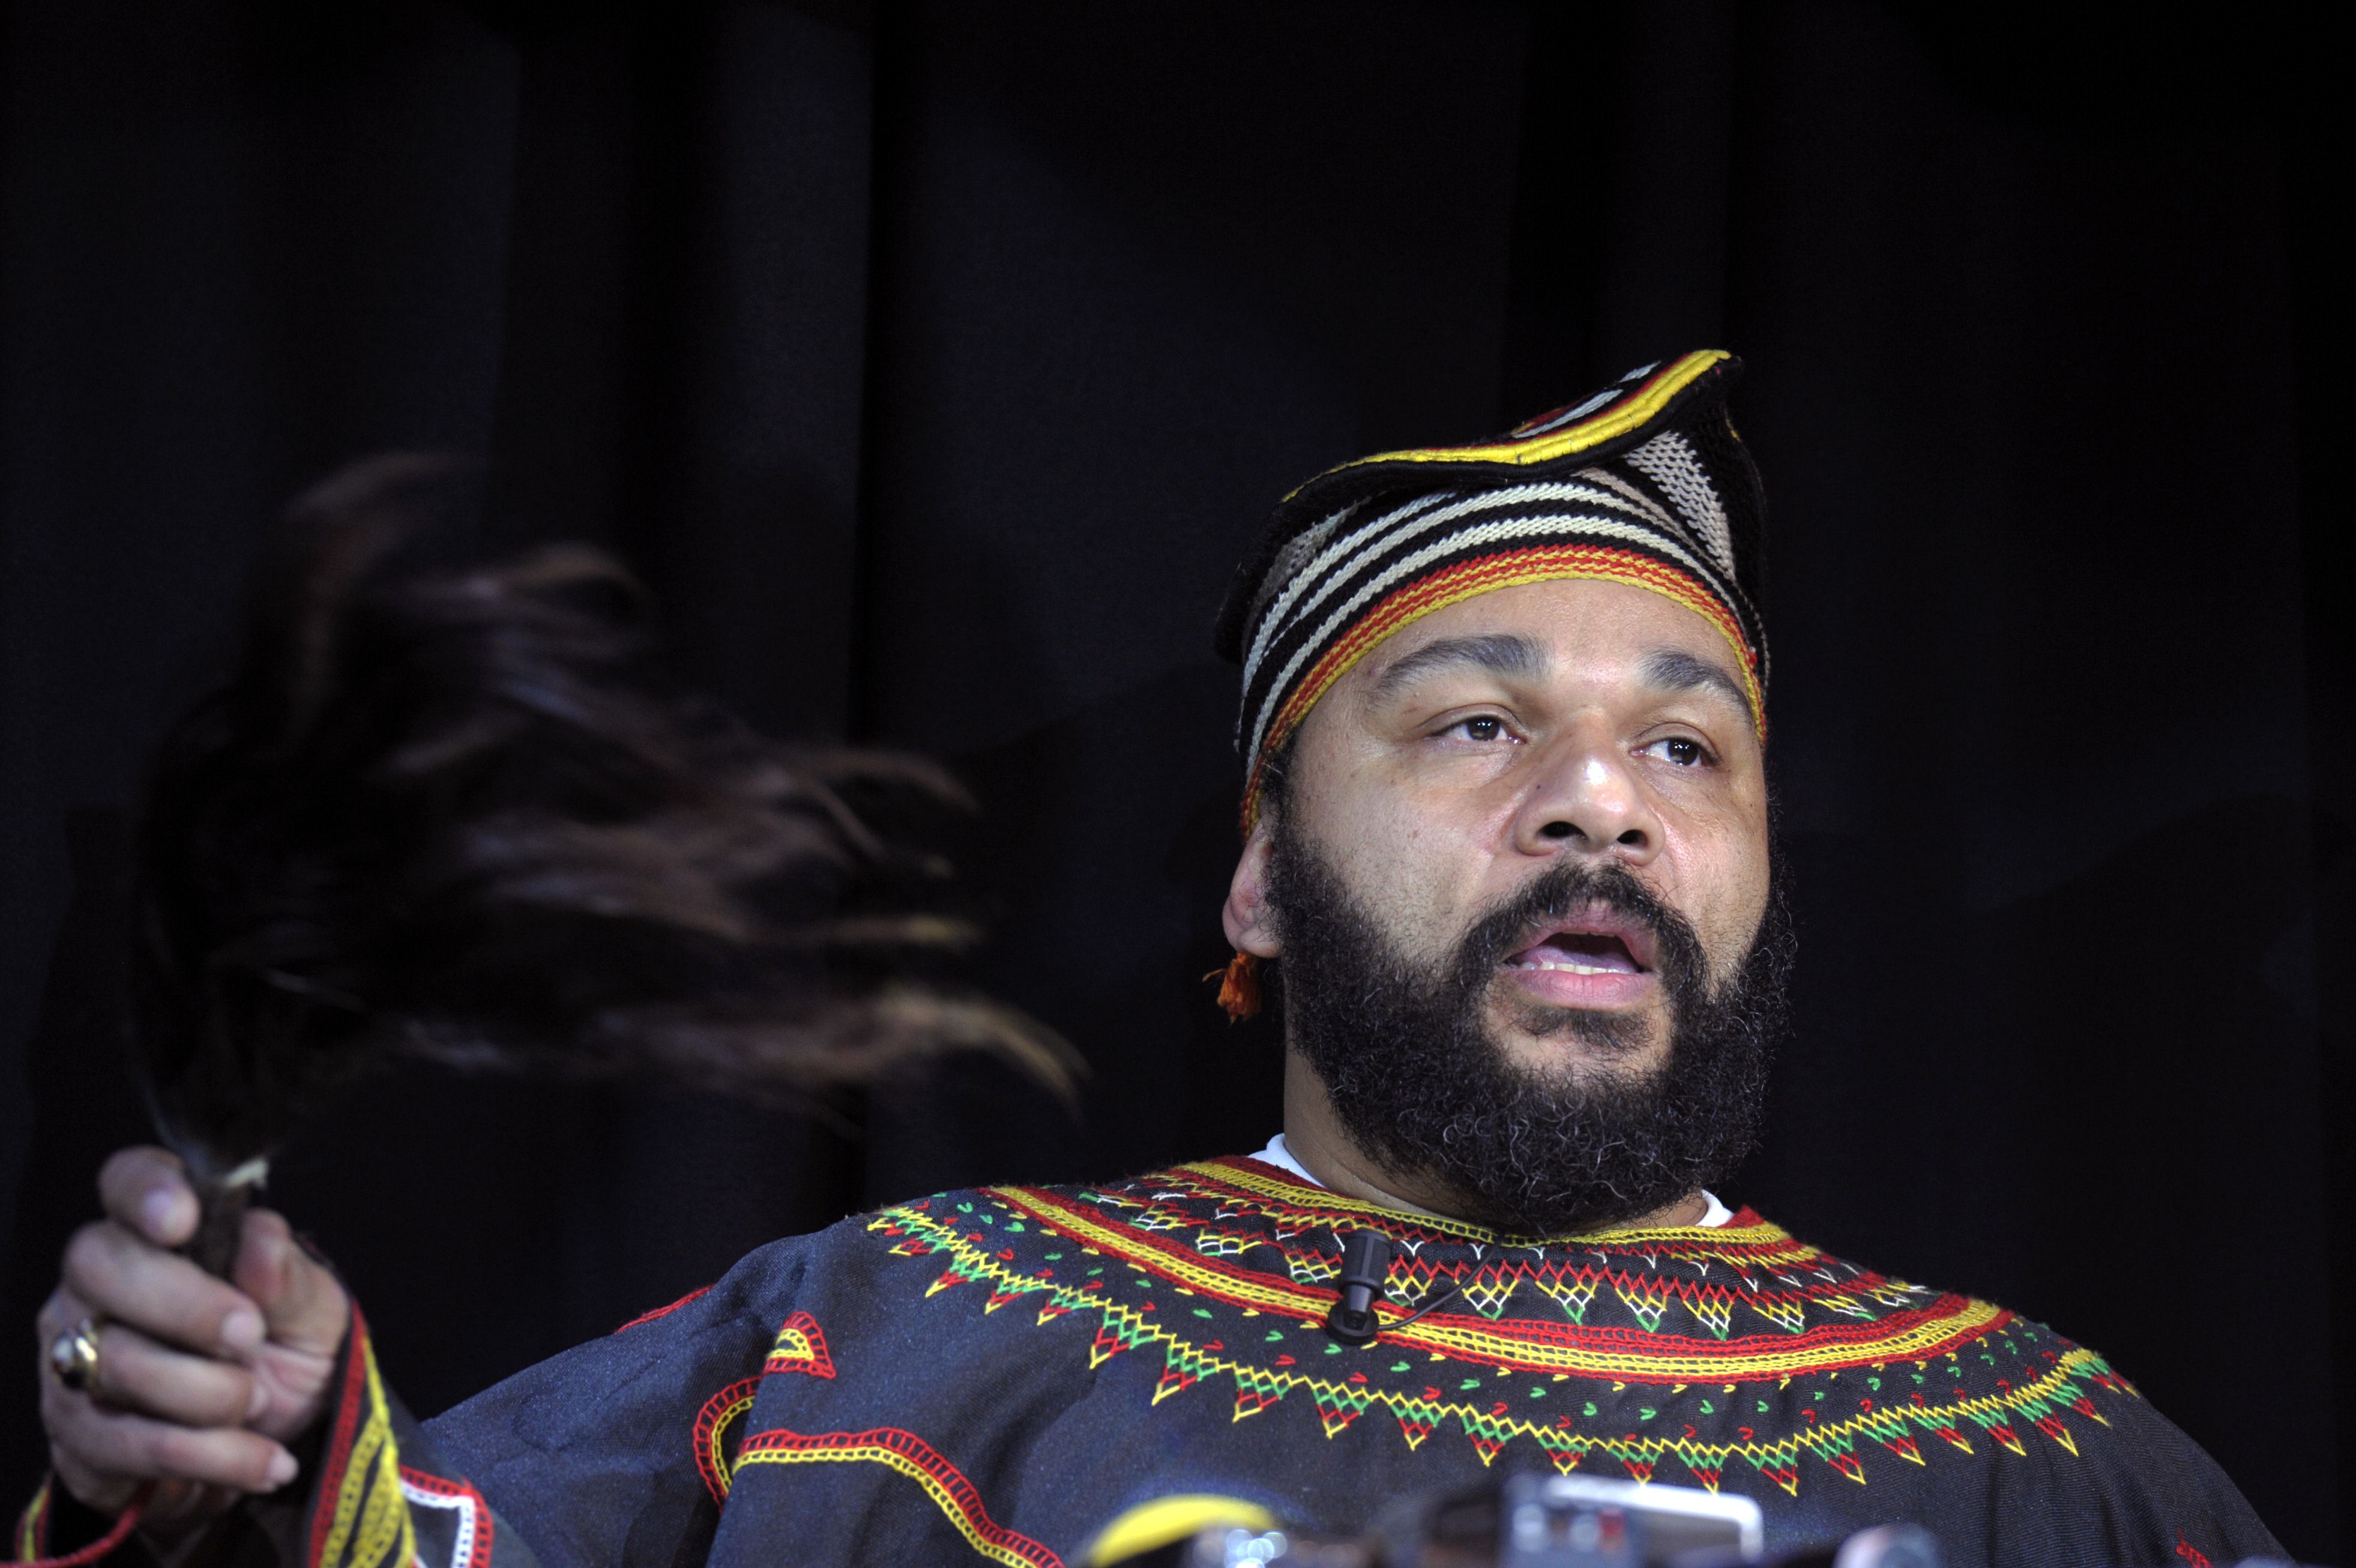 (FILES) In this file picture taken on January 11, 2014 controversial French humourist Dieudonne M'bala M'bala holds a fly-swat as he gives a press conference in the Theatre de la Main d'or in Paris. Controversial French comedian Dieudonne M'bala M'bala has been banned from entering Britain, the interior ministry said on February 3, 2014, after he reportedly planned to visit to support Nicolas Anelka over the footballer's use of the "quenelle" gesture. "We can confirm that Mr Dieudonne is subject to an exclusion order. The home secretary will seek to exclude an individual from the UK if she considers that there are public policy or public security reasons to do so," a Home Office spokeswoman said. AFP PHOTO / ALAIN JOCARD